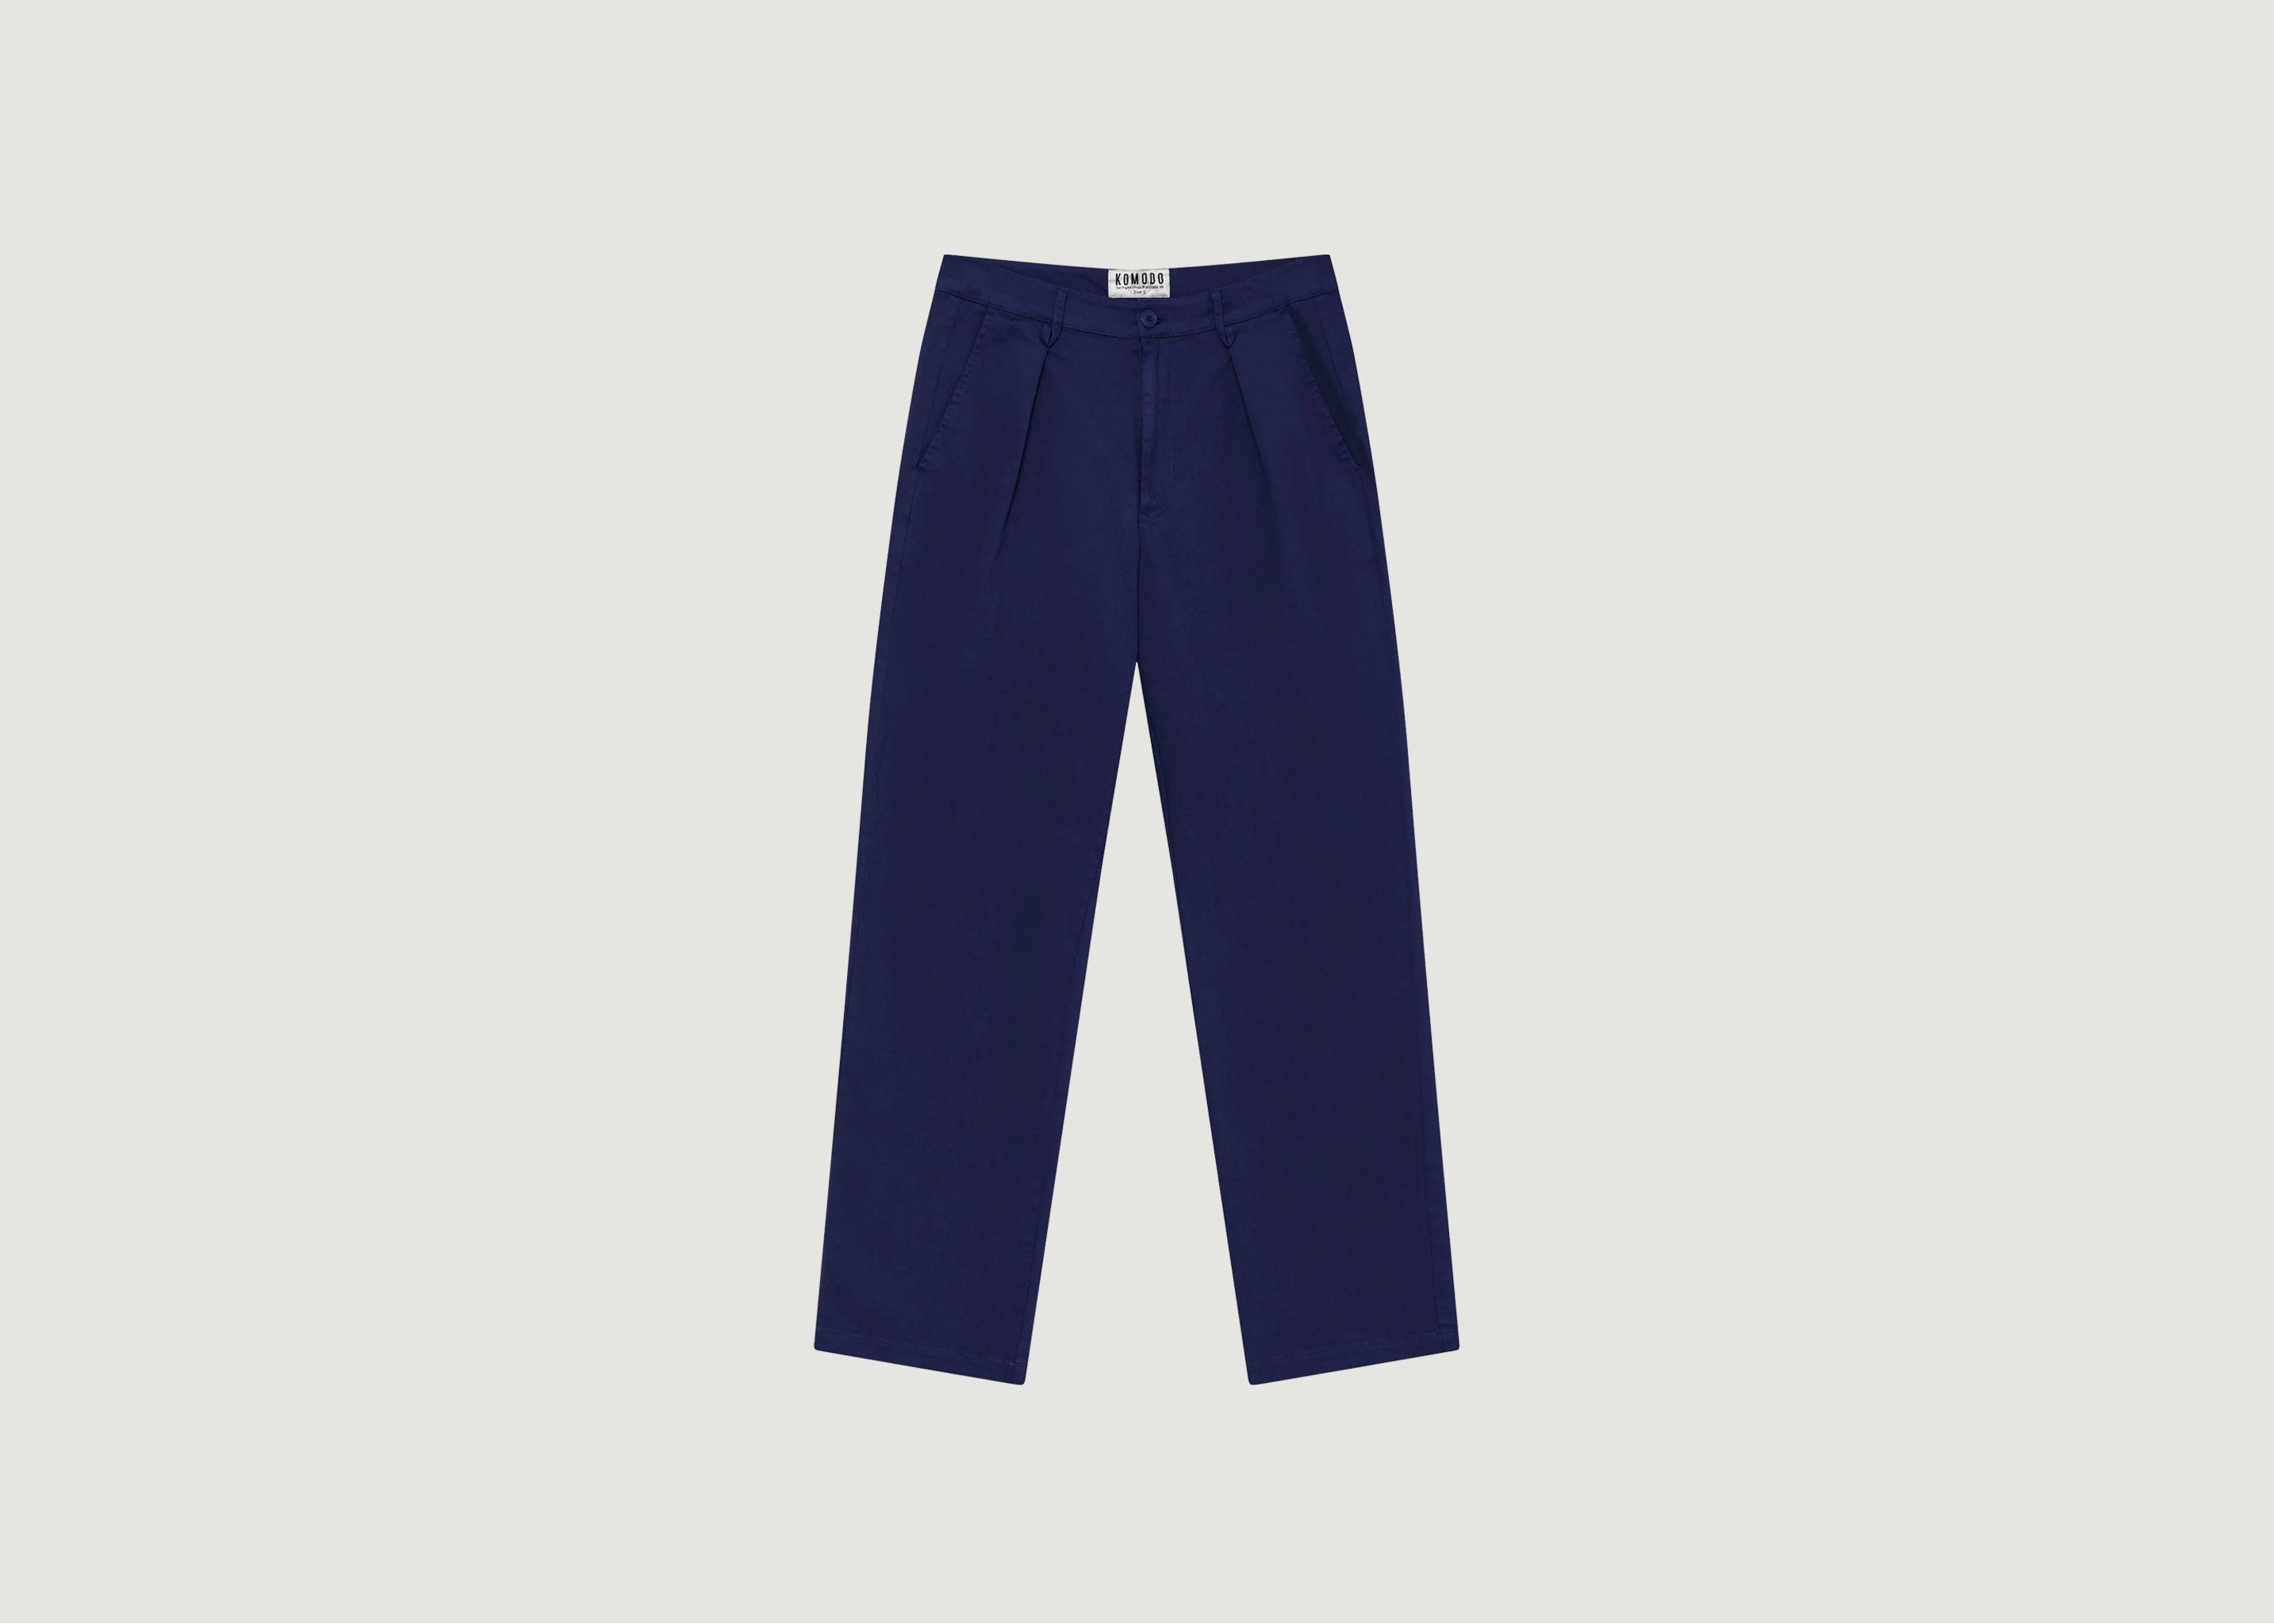 Bowie • Loose Fit Organic Cotton Twill Trouser - komodo